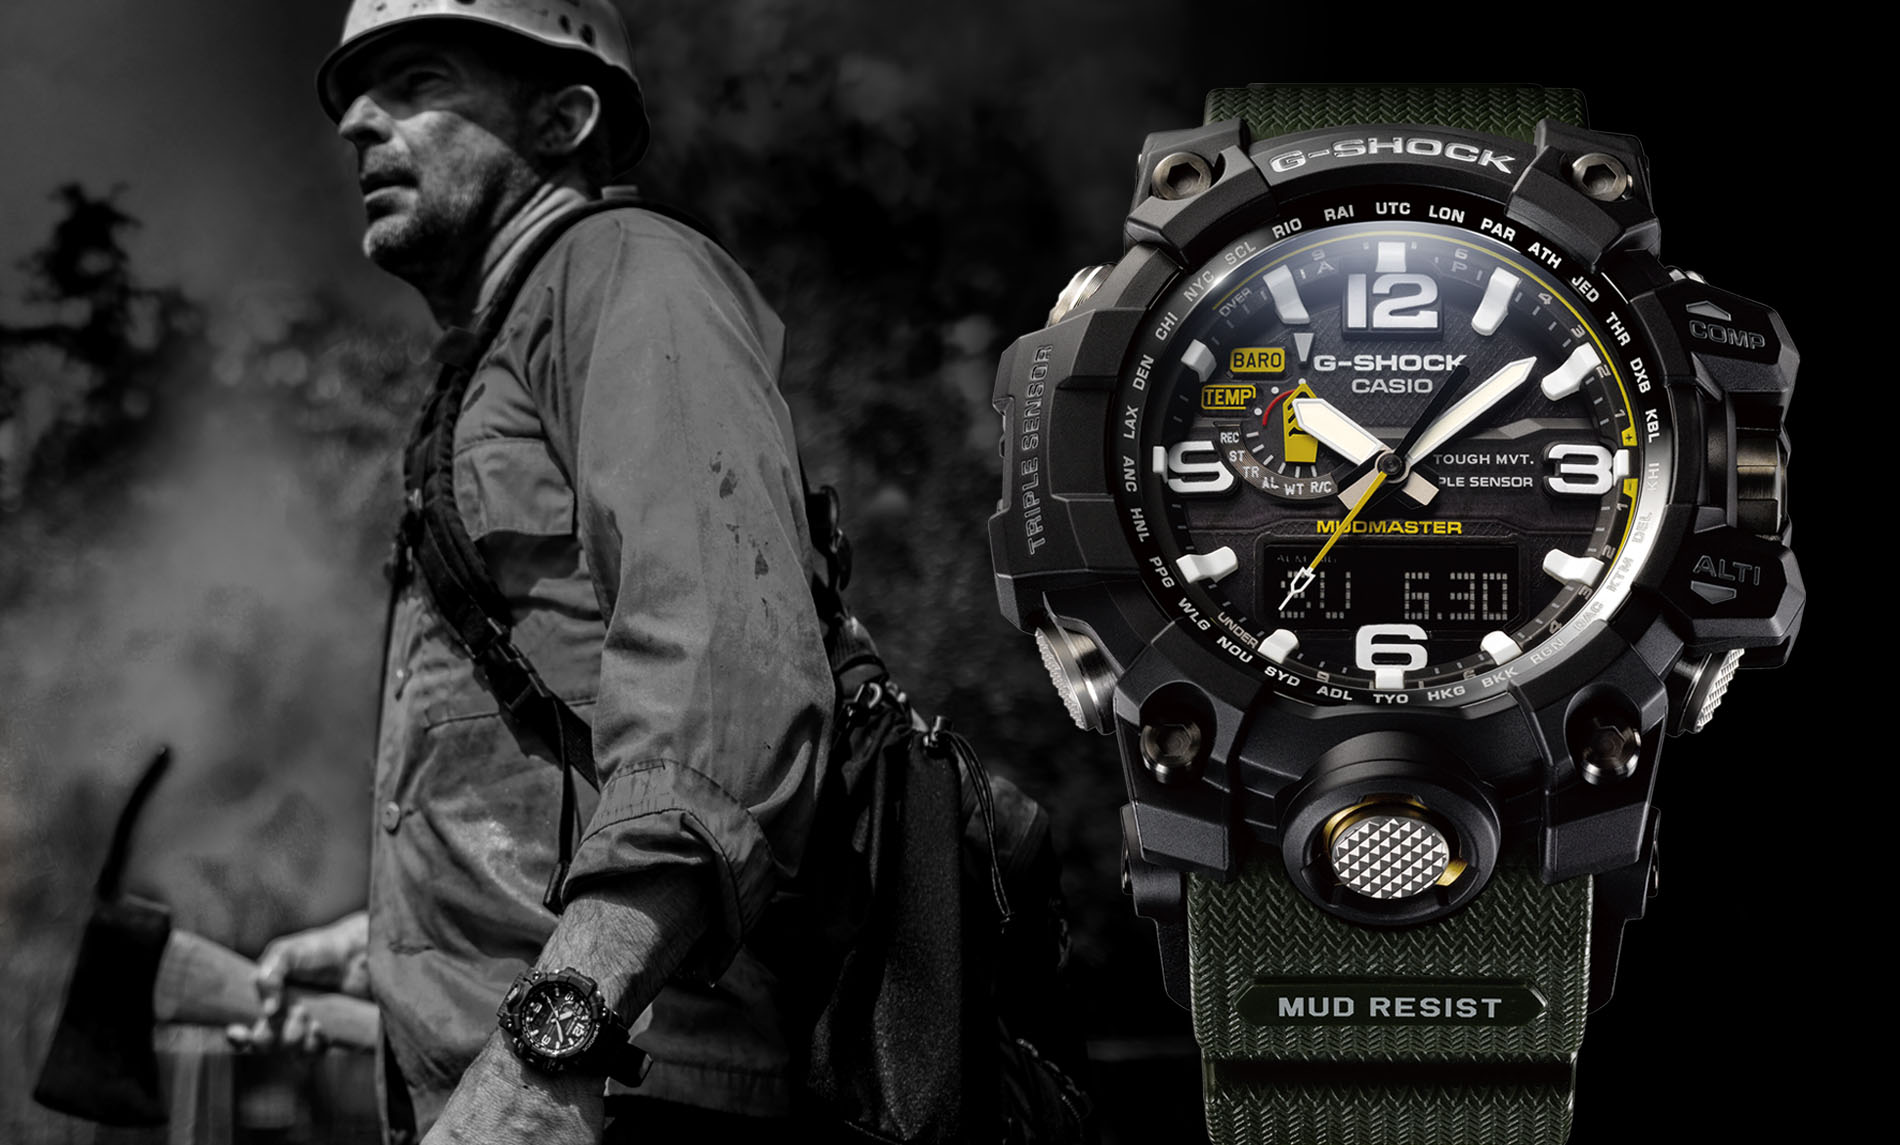 G-Shock GWG-1000 / 5463 / The First Analog Watch with Mud Resist 